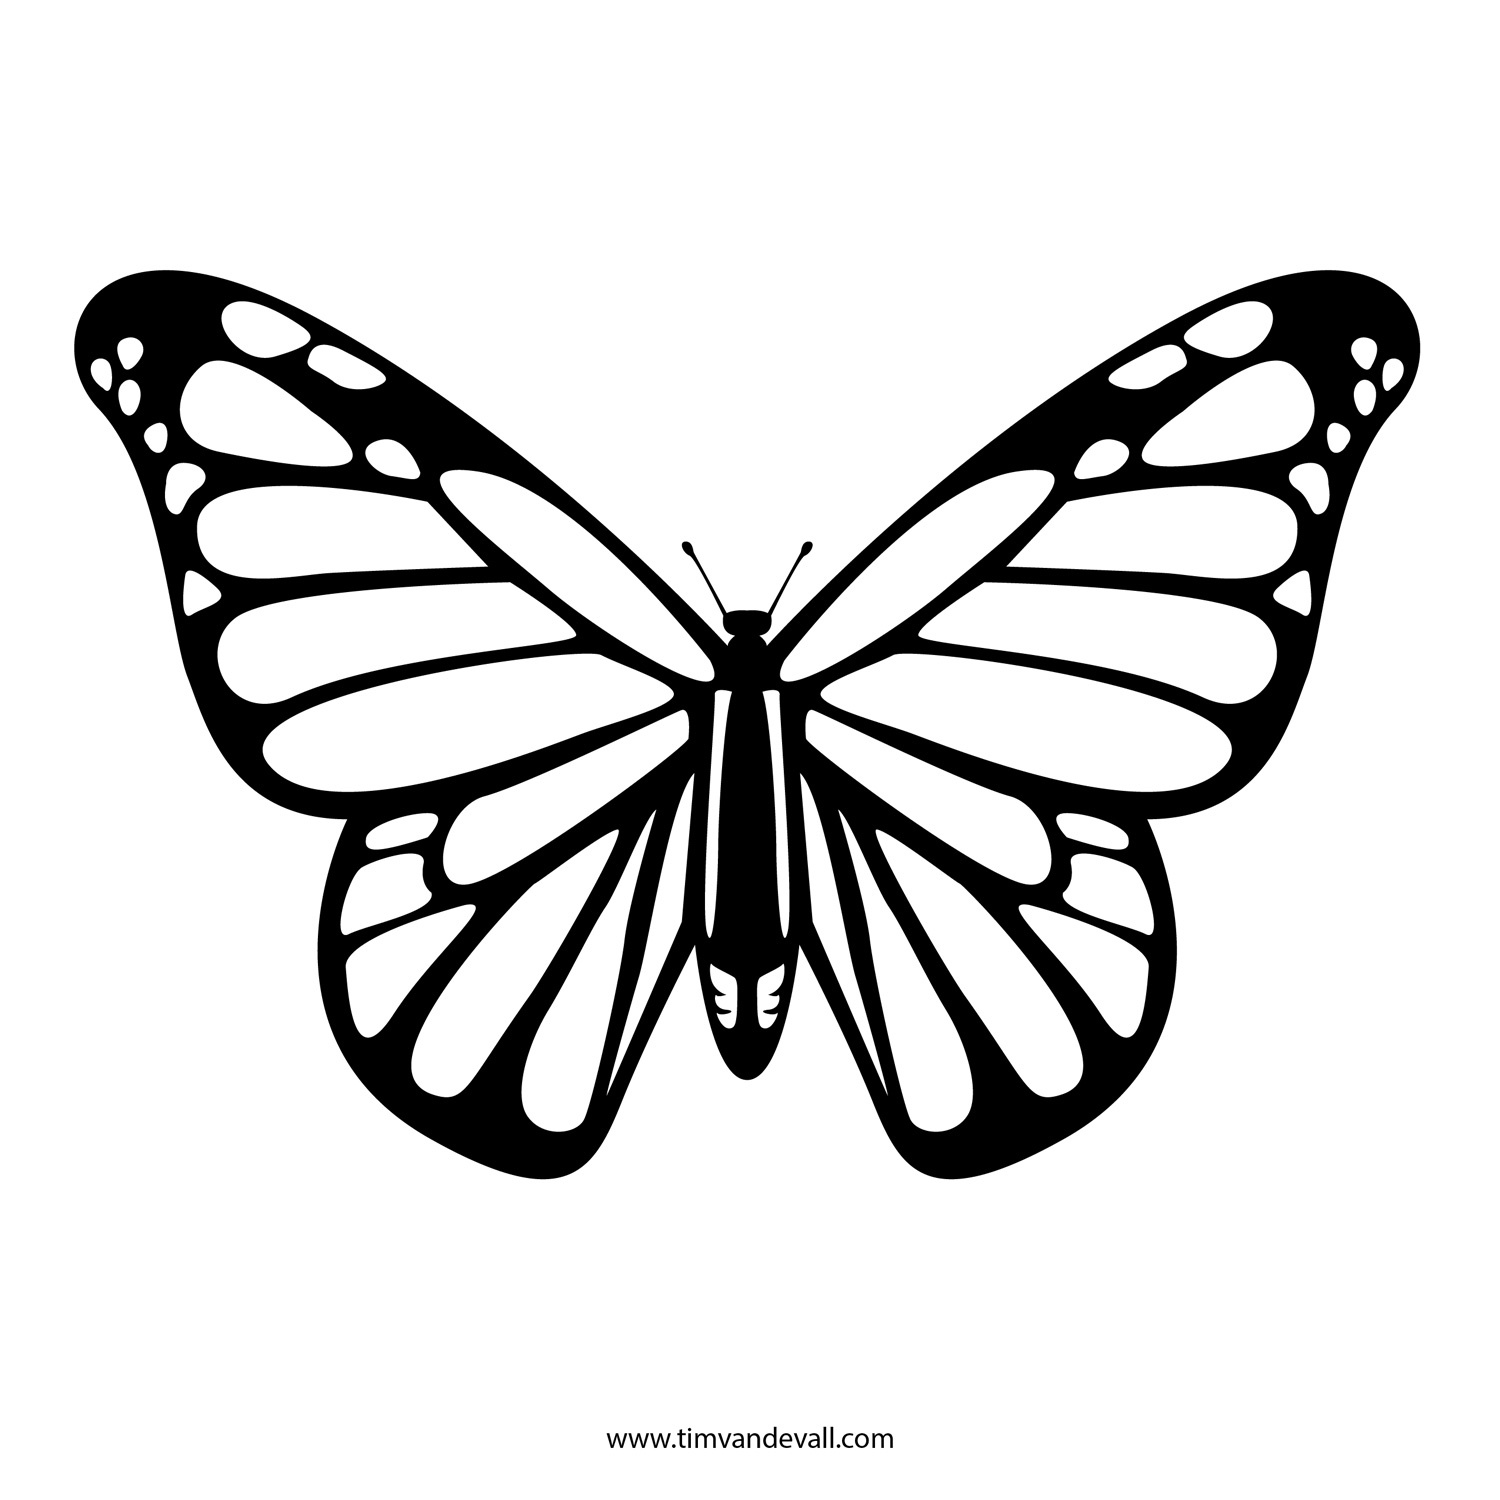 Free Butterfly Stencil | Monarch Butterfly Outline And Silhouette - Free Printable Butterfly